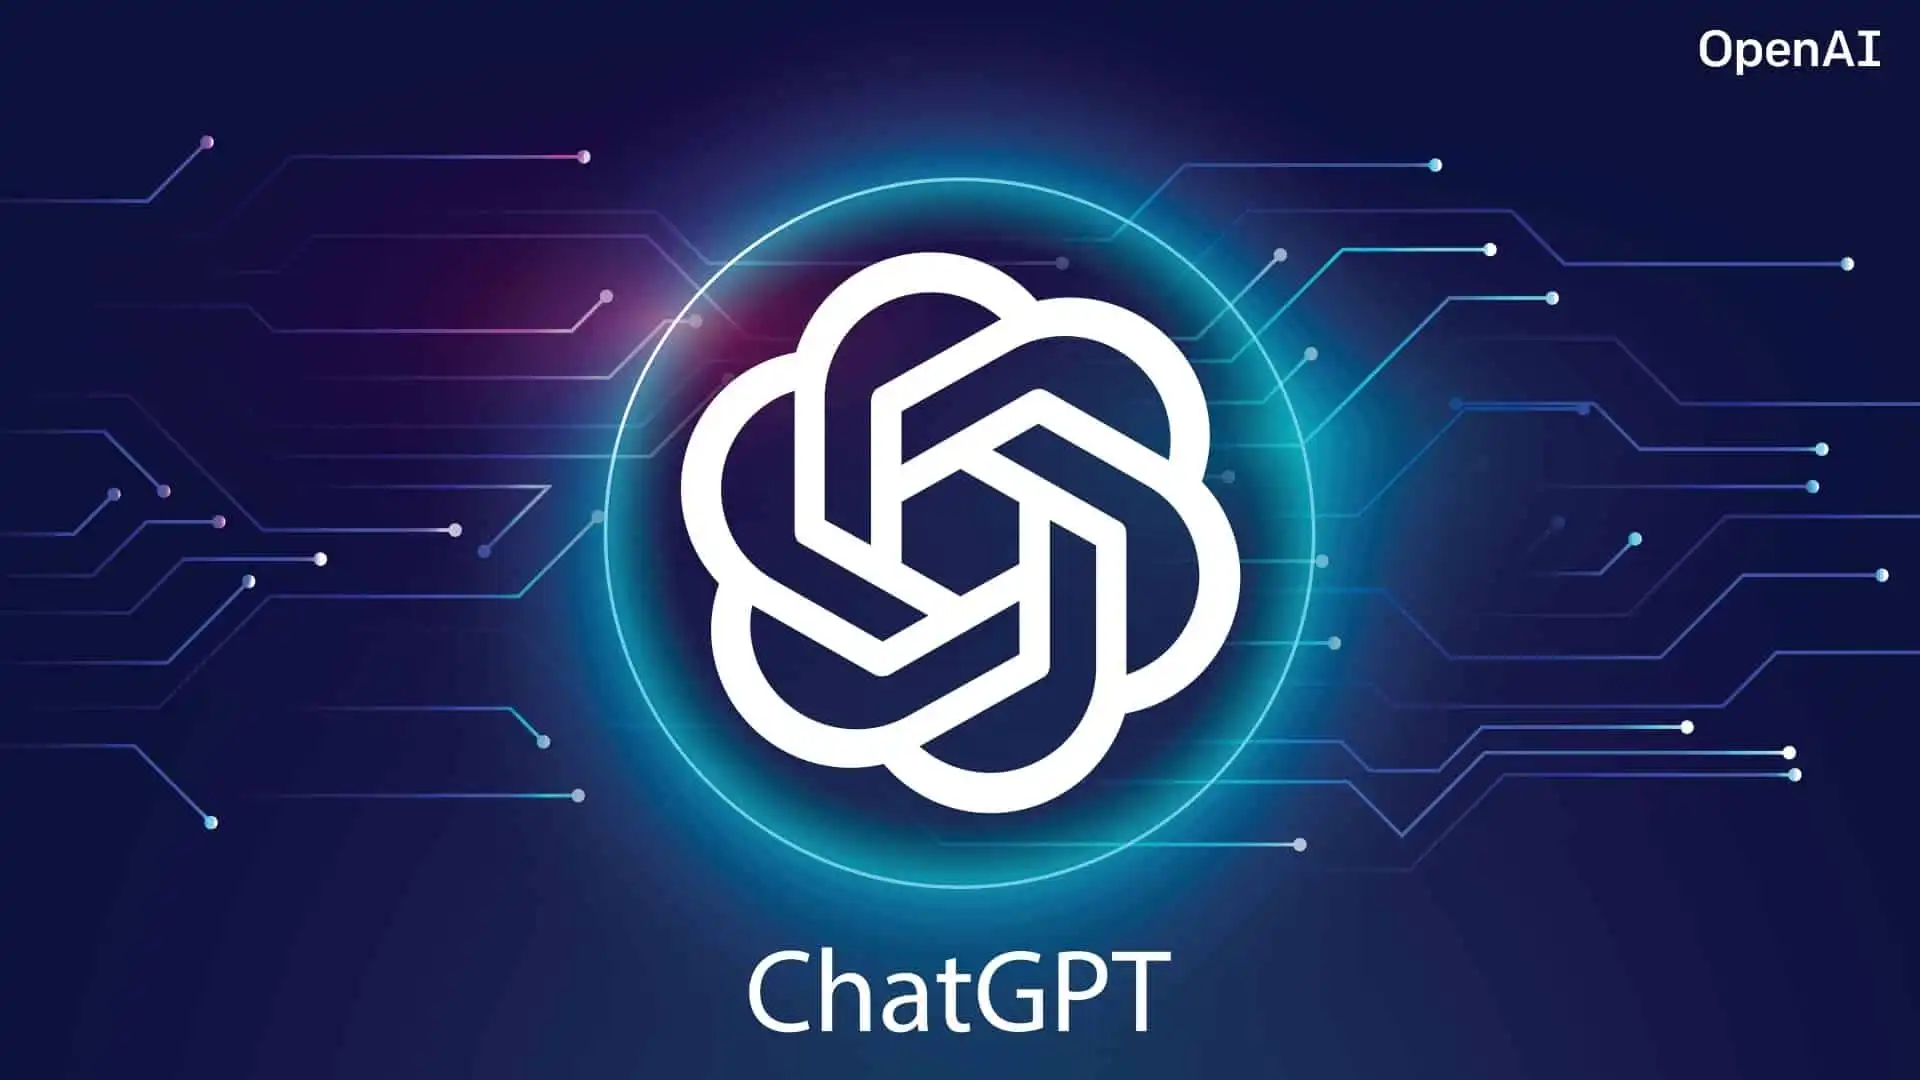 Use Cases Favoring ChatGPT